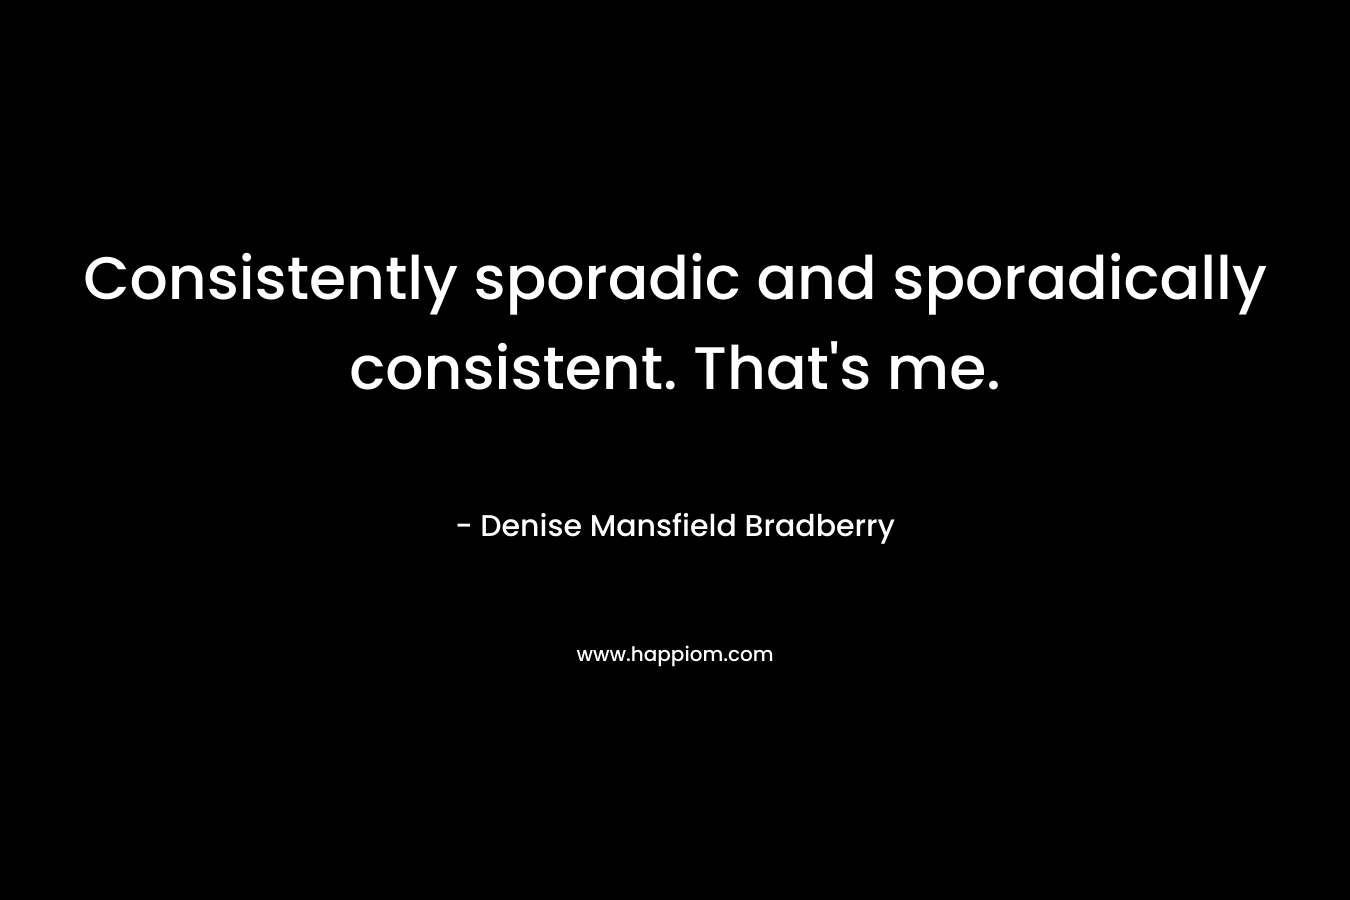 Consistently sporadic and sporadically consistent. That’s me. – Denise Mansfield Bradberry